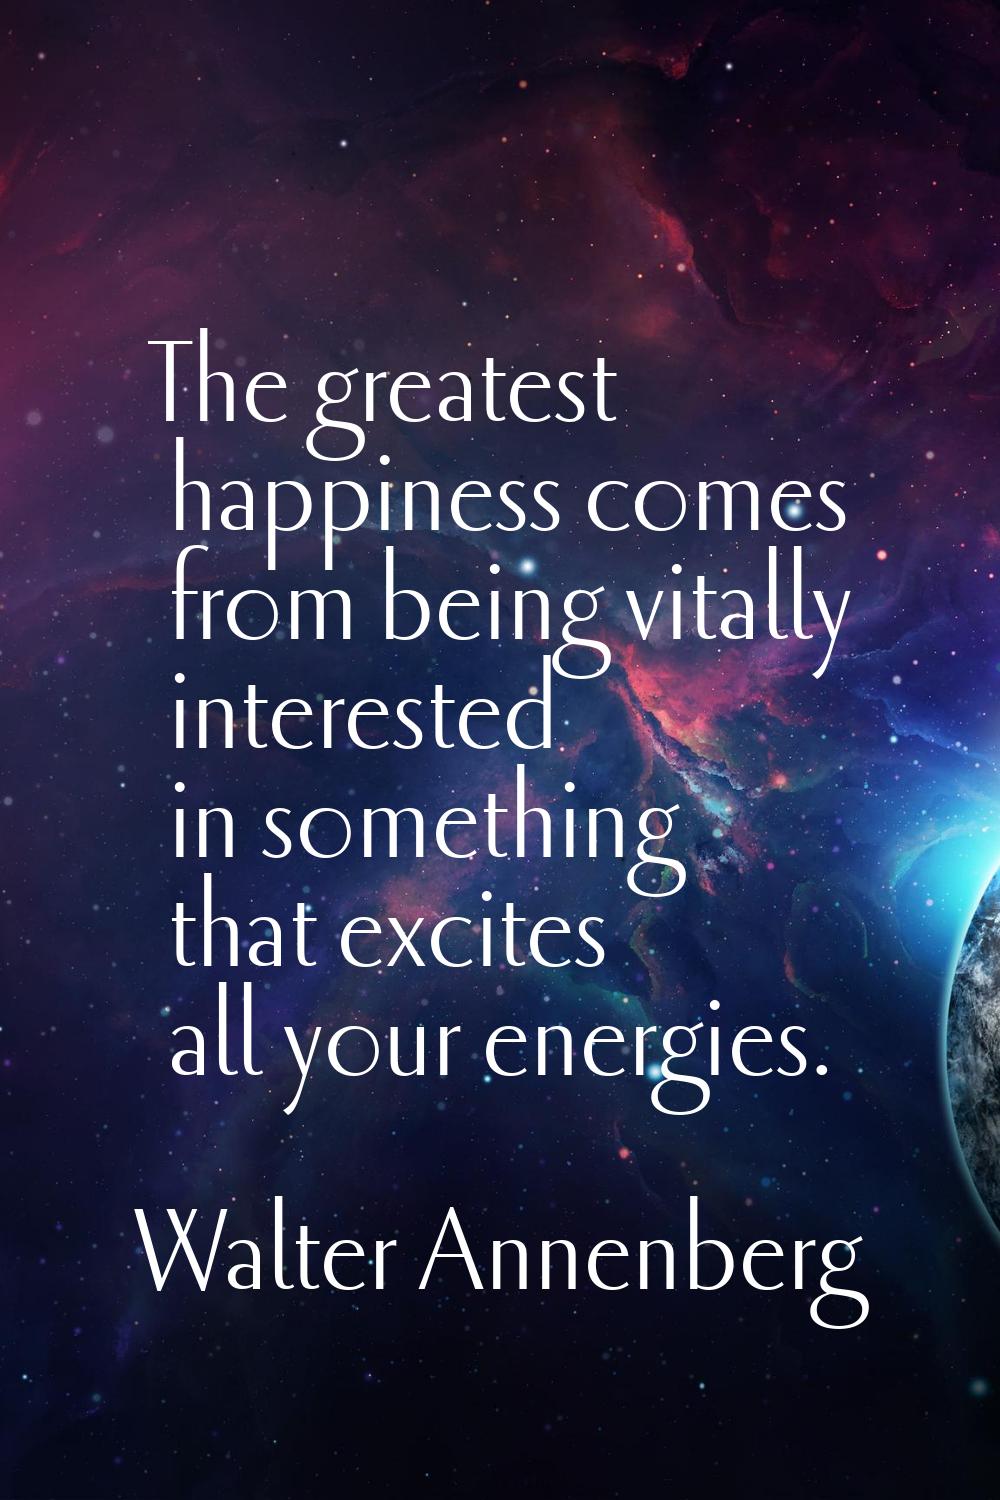 The greatest happiness comes from being vitally interested in something that excites all your energ